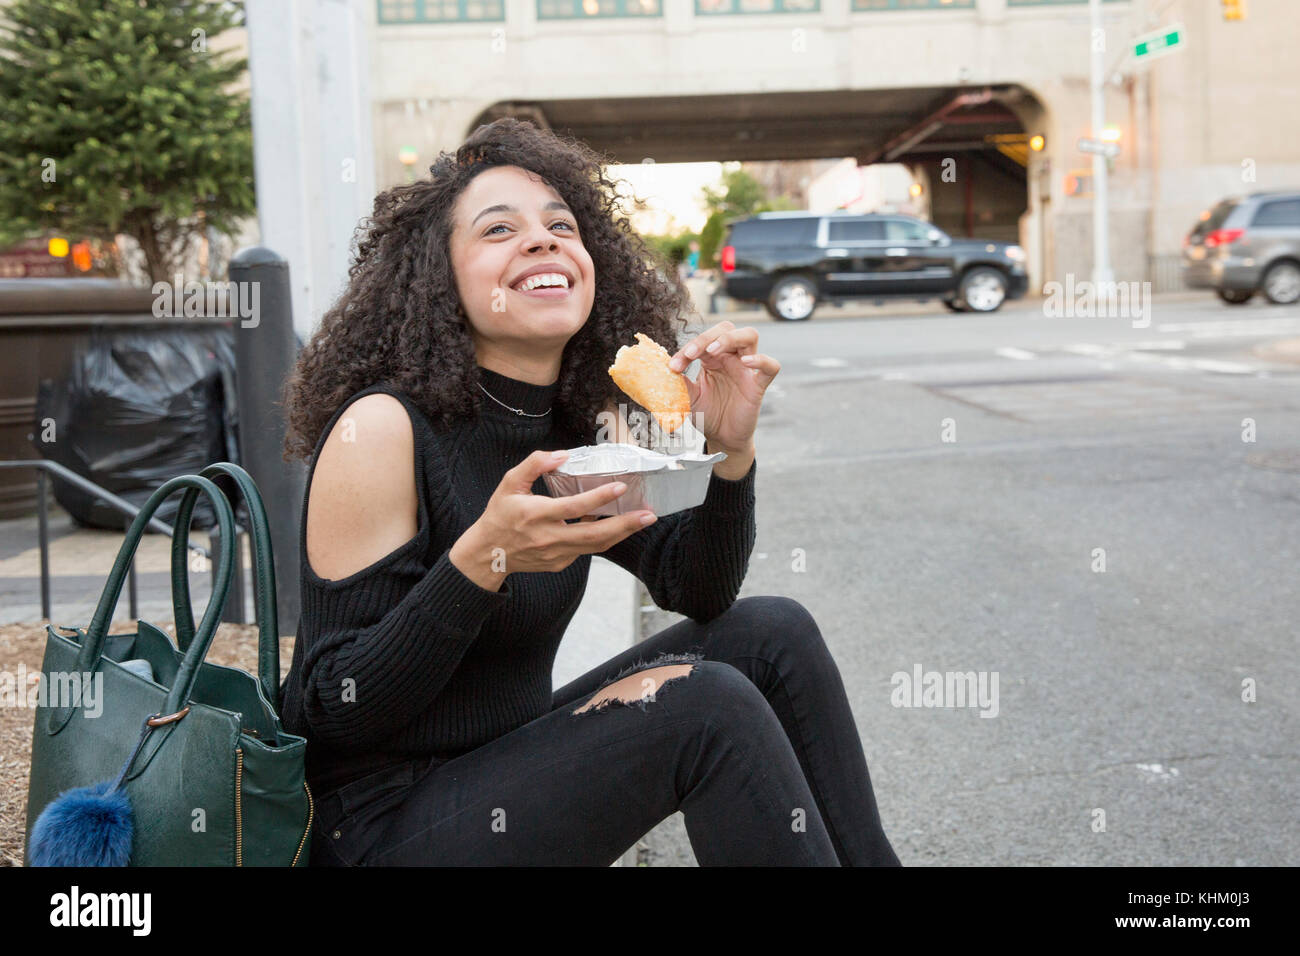 Young woman eating outside a grocery store in Queens, New York Stock Photo